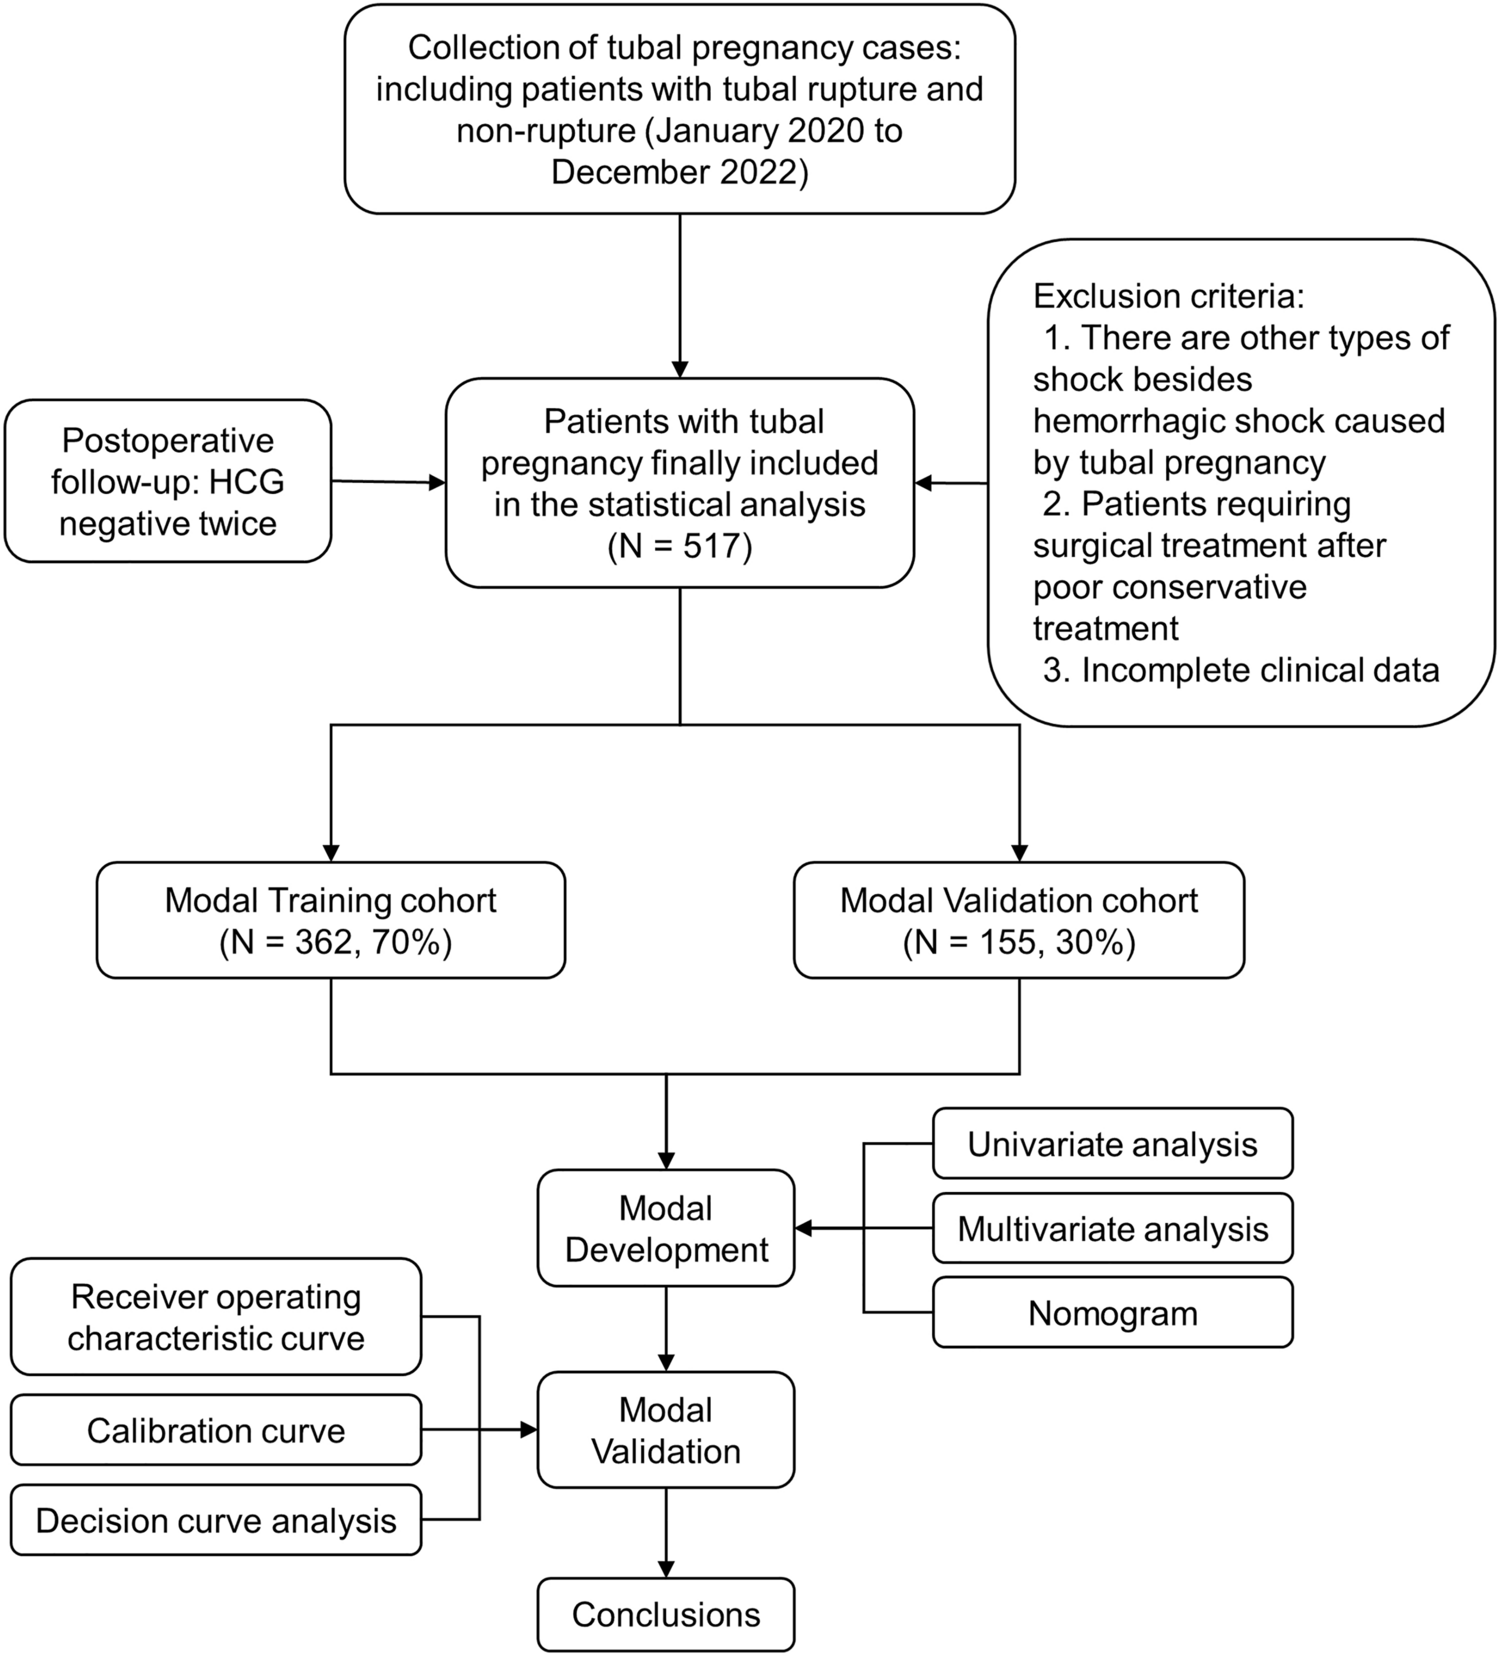 Construction and Validation of a Clinical Prediction Model for Predicting Tubal Pregnancy Rupture Based on Nomogram